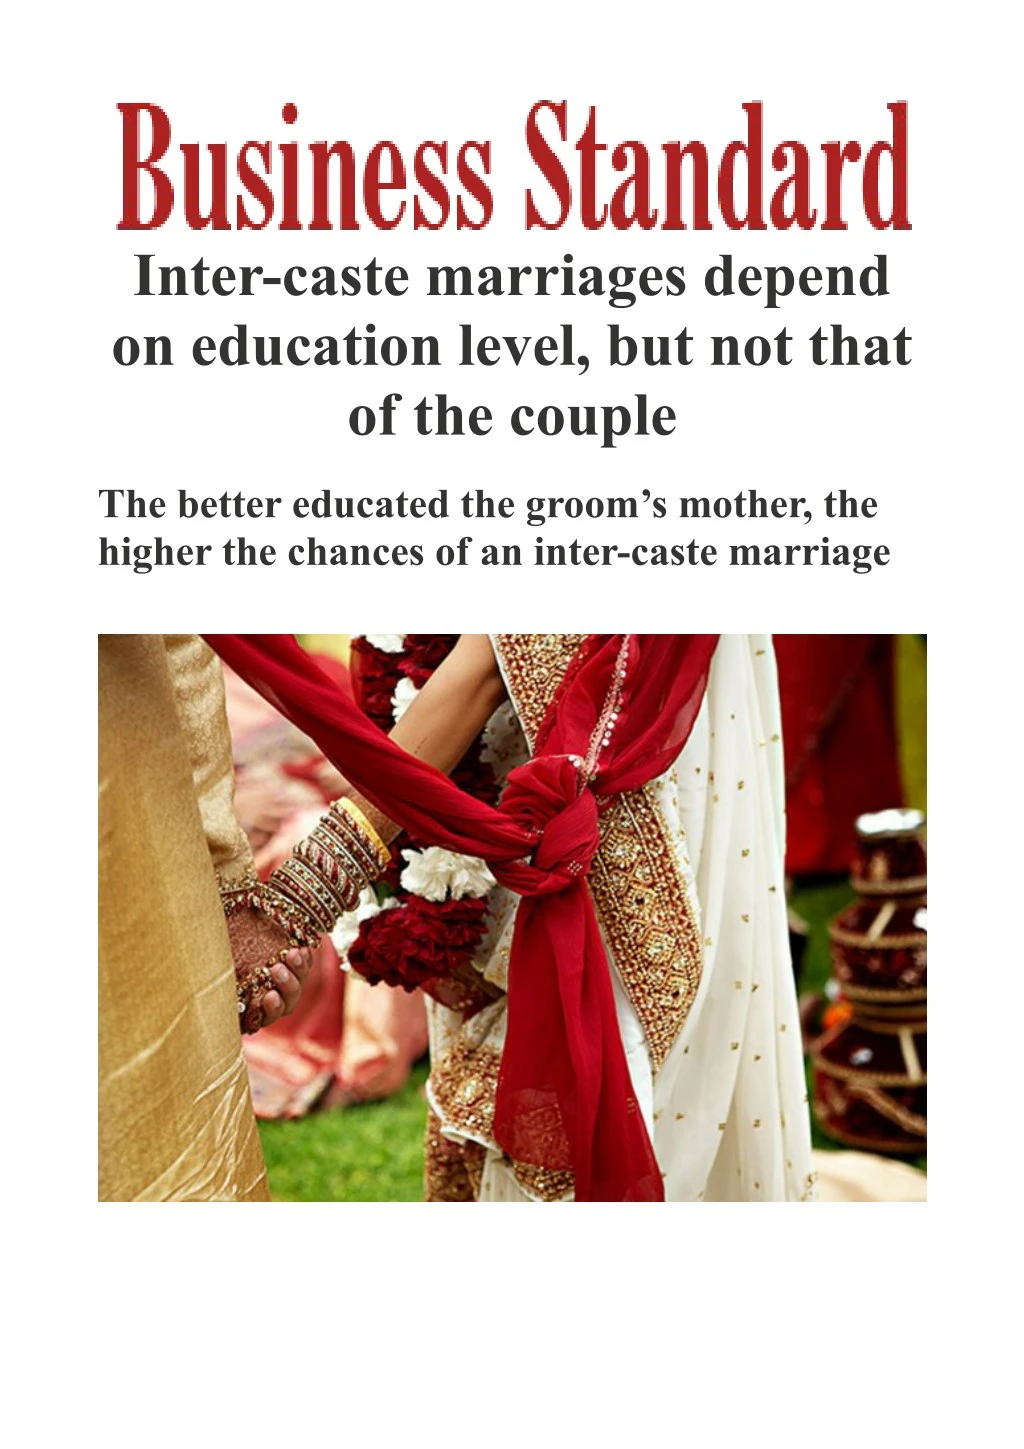 inter caste marriages depend on education level